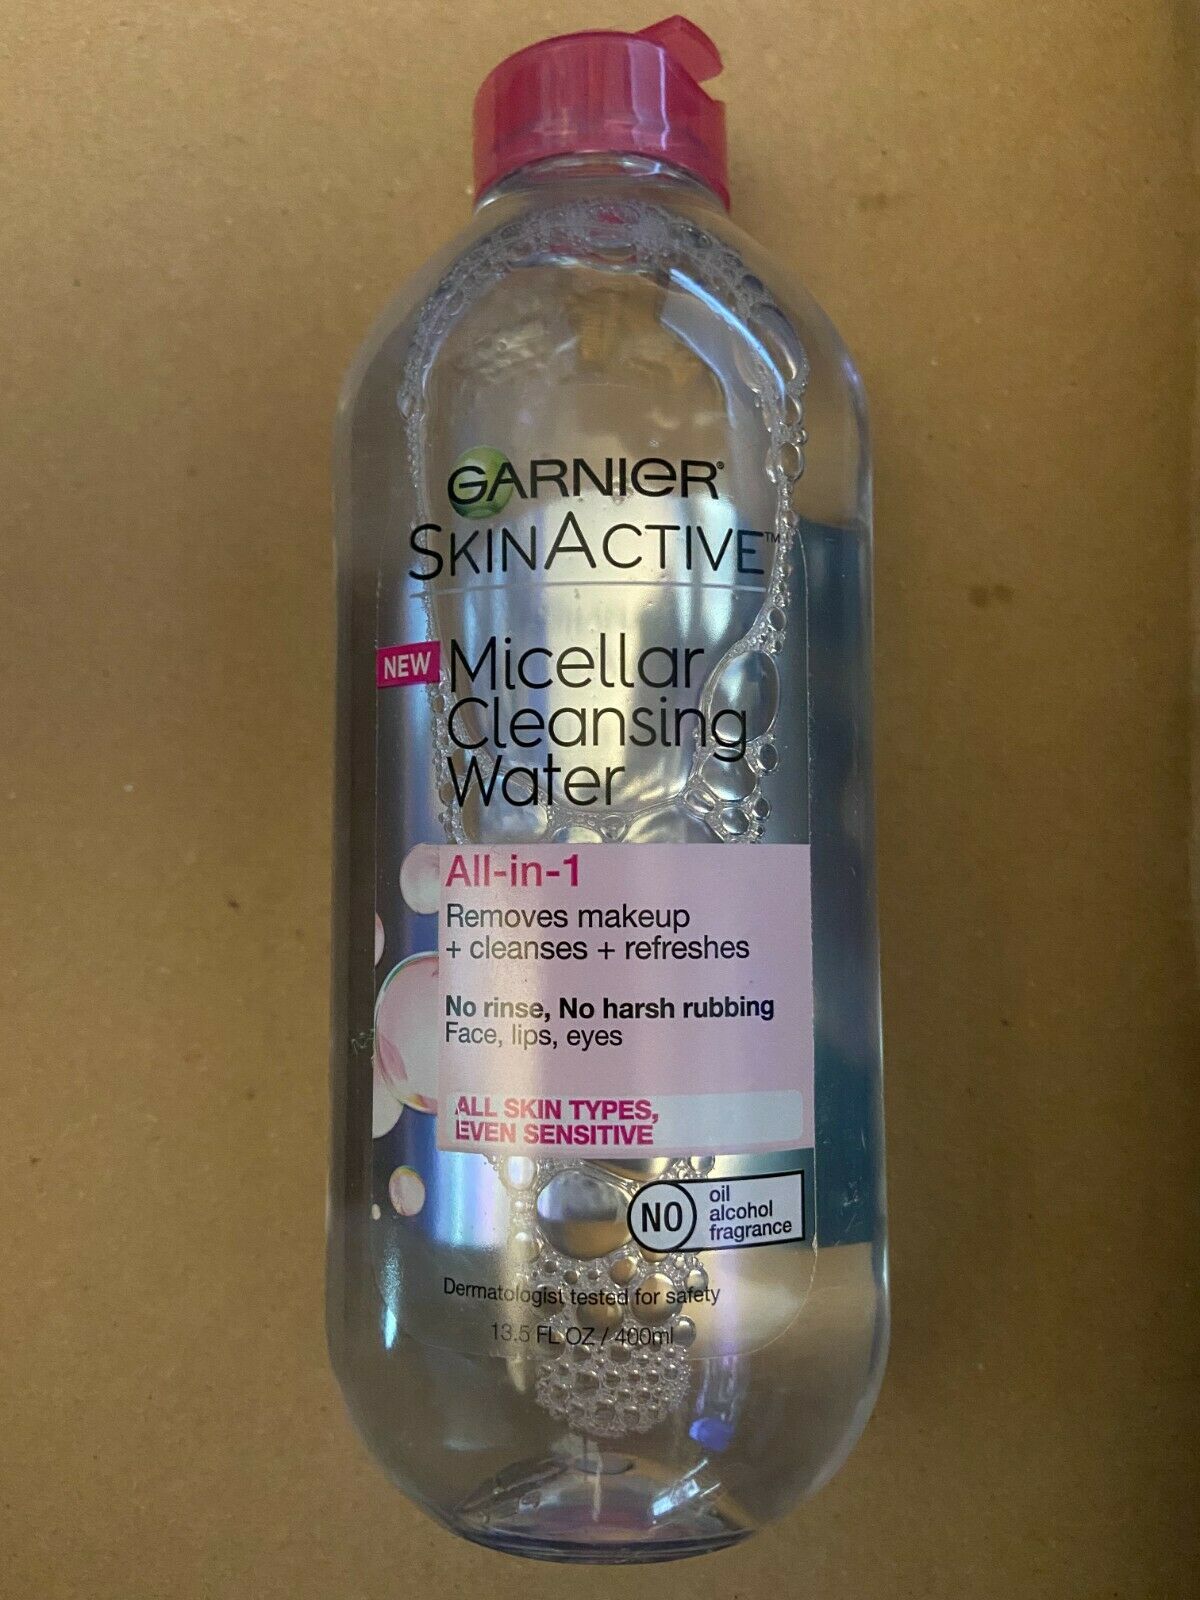 Primary image for Garnier SkinActive Micellar Cleansing Water *NEW* ii1